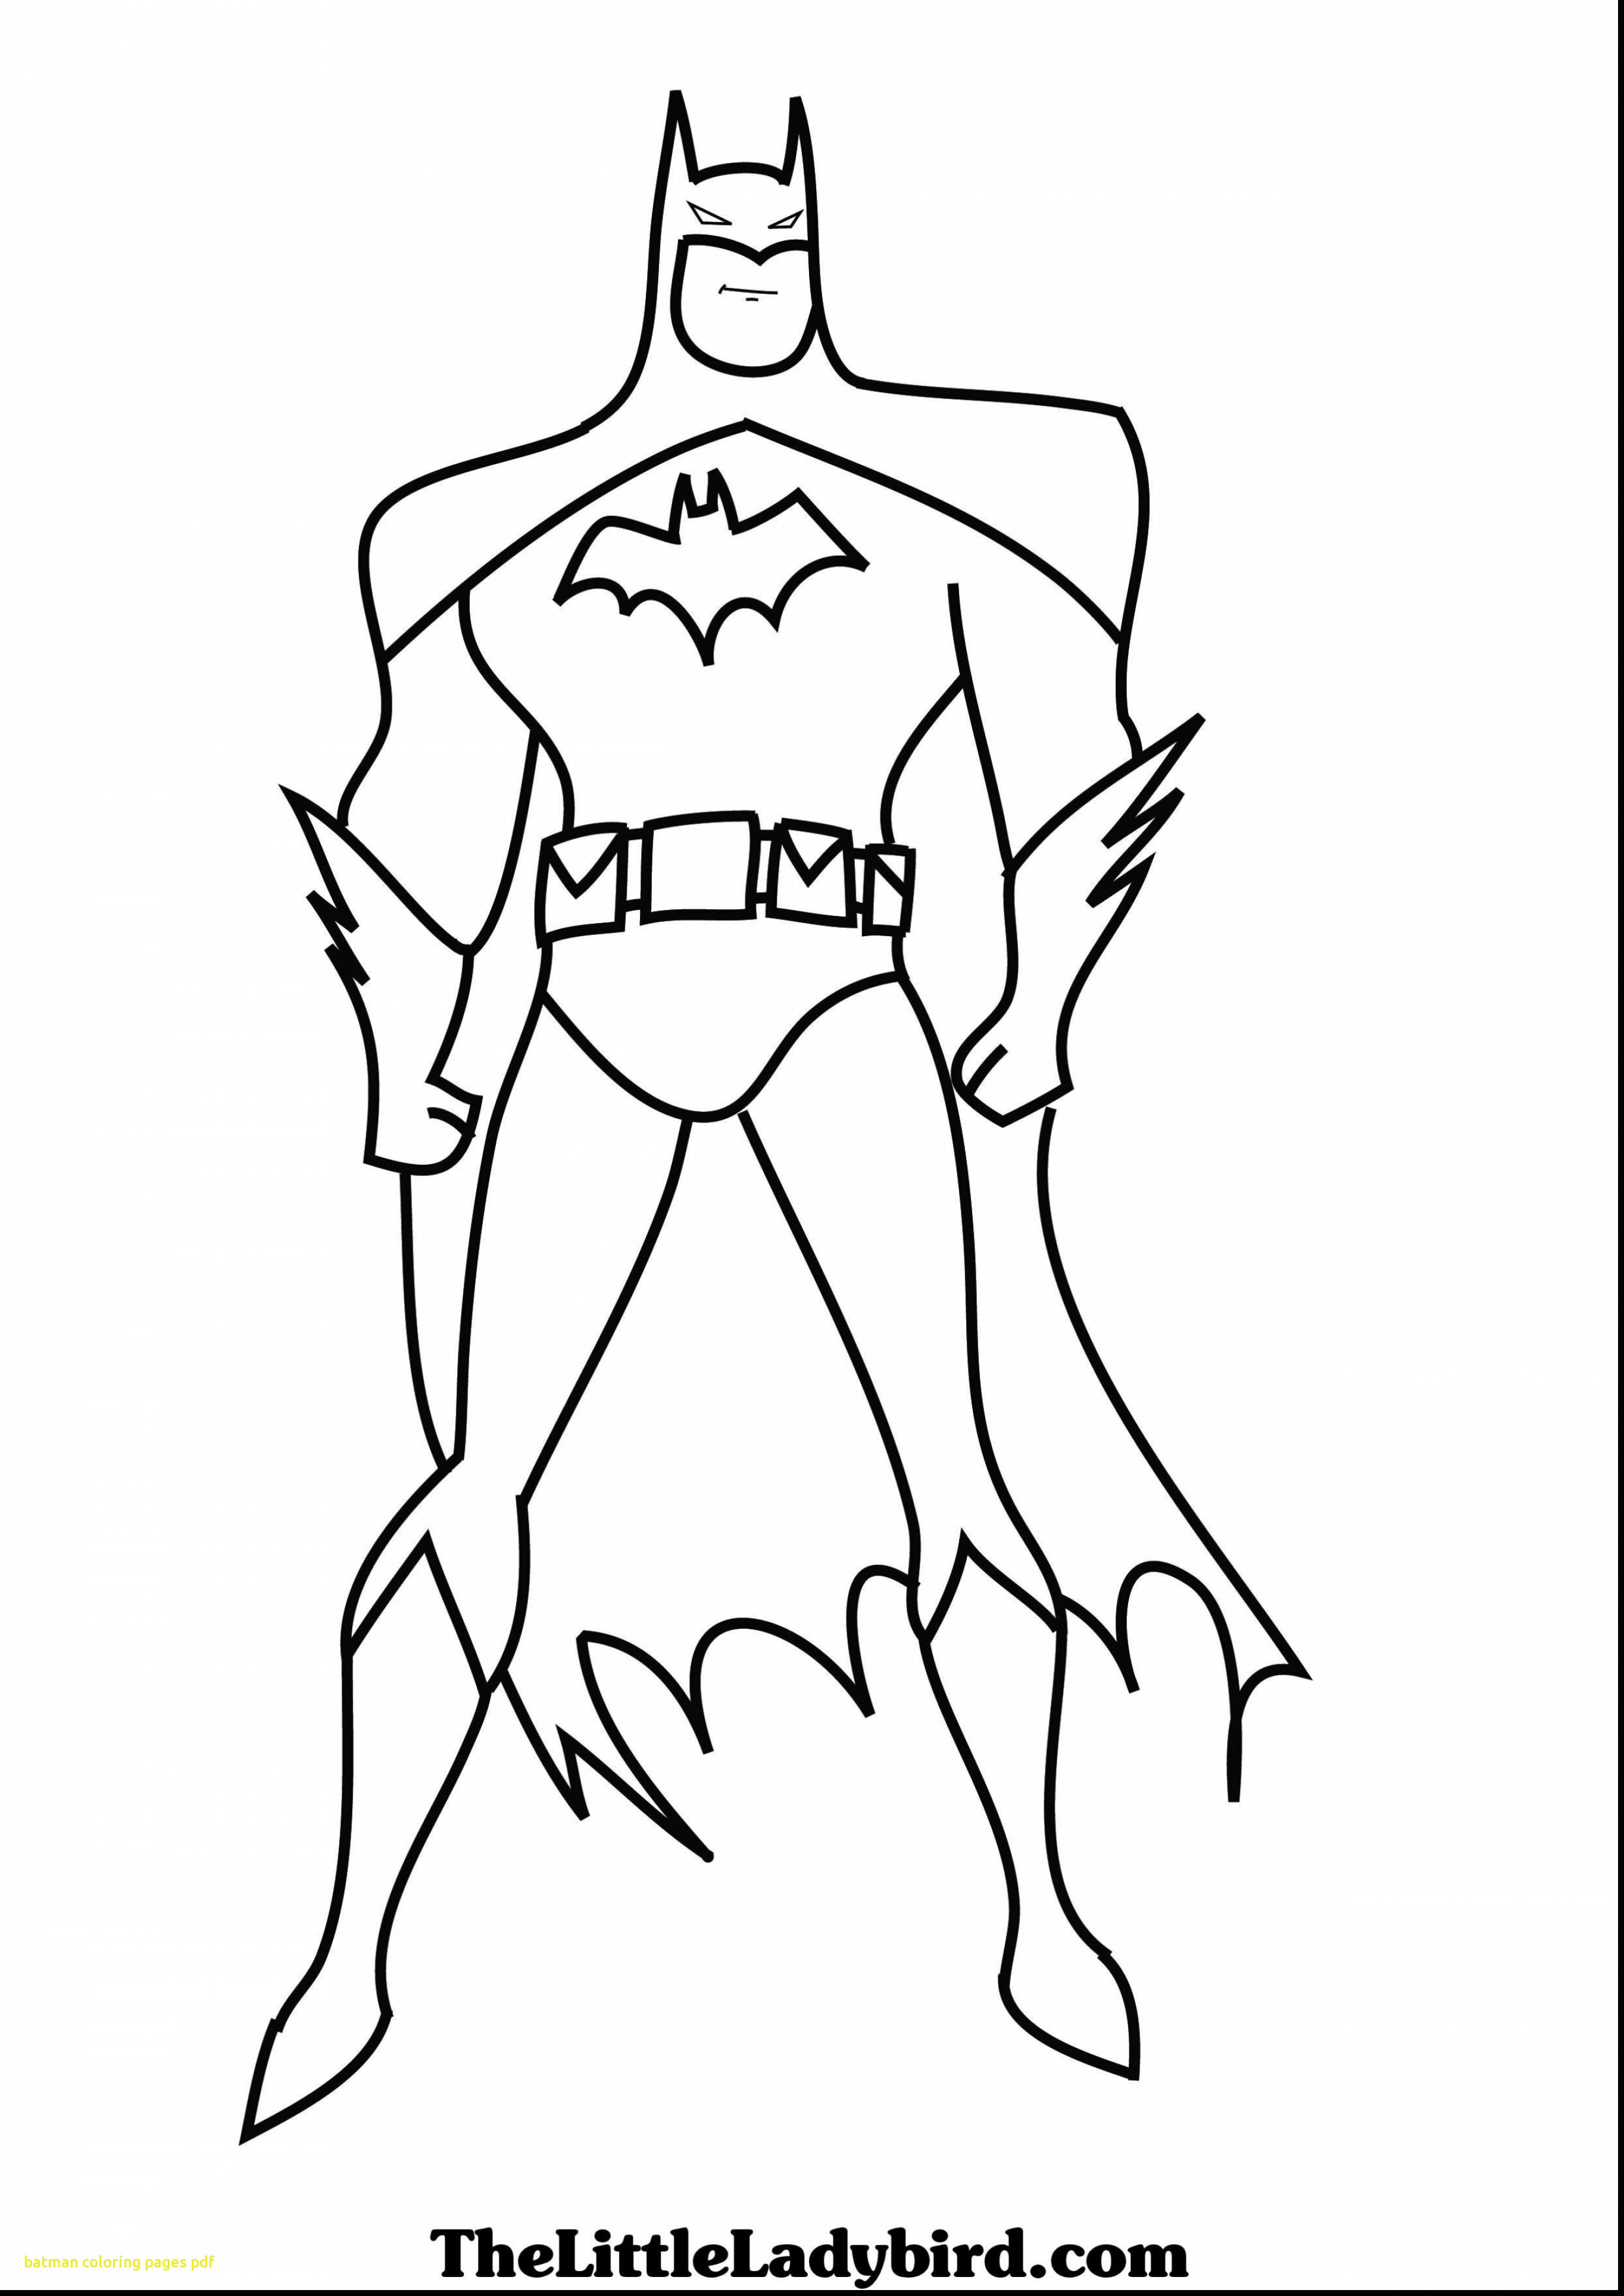 printable-coloring-pages-batman-customize-and-print